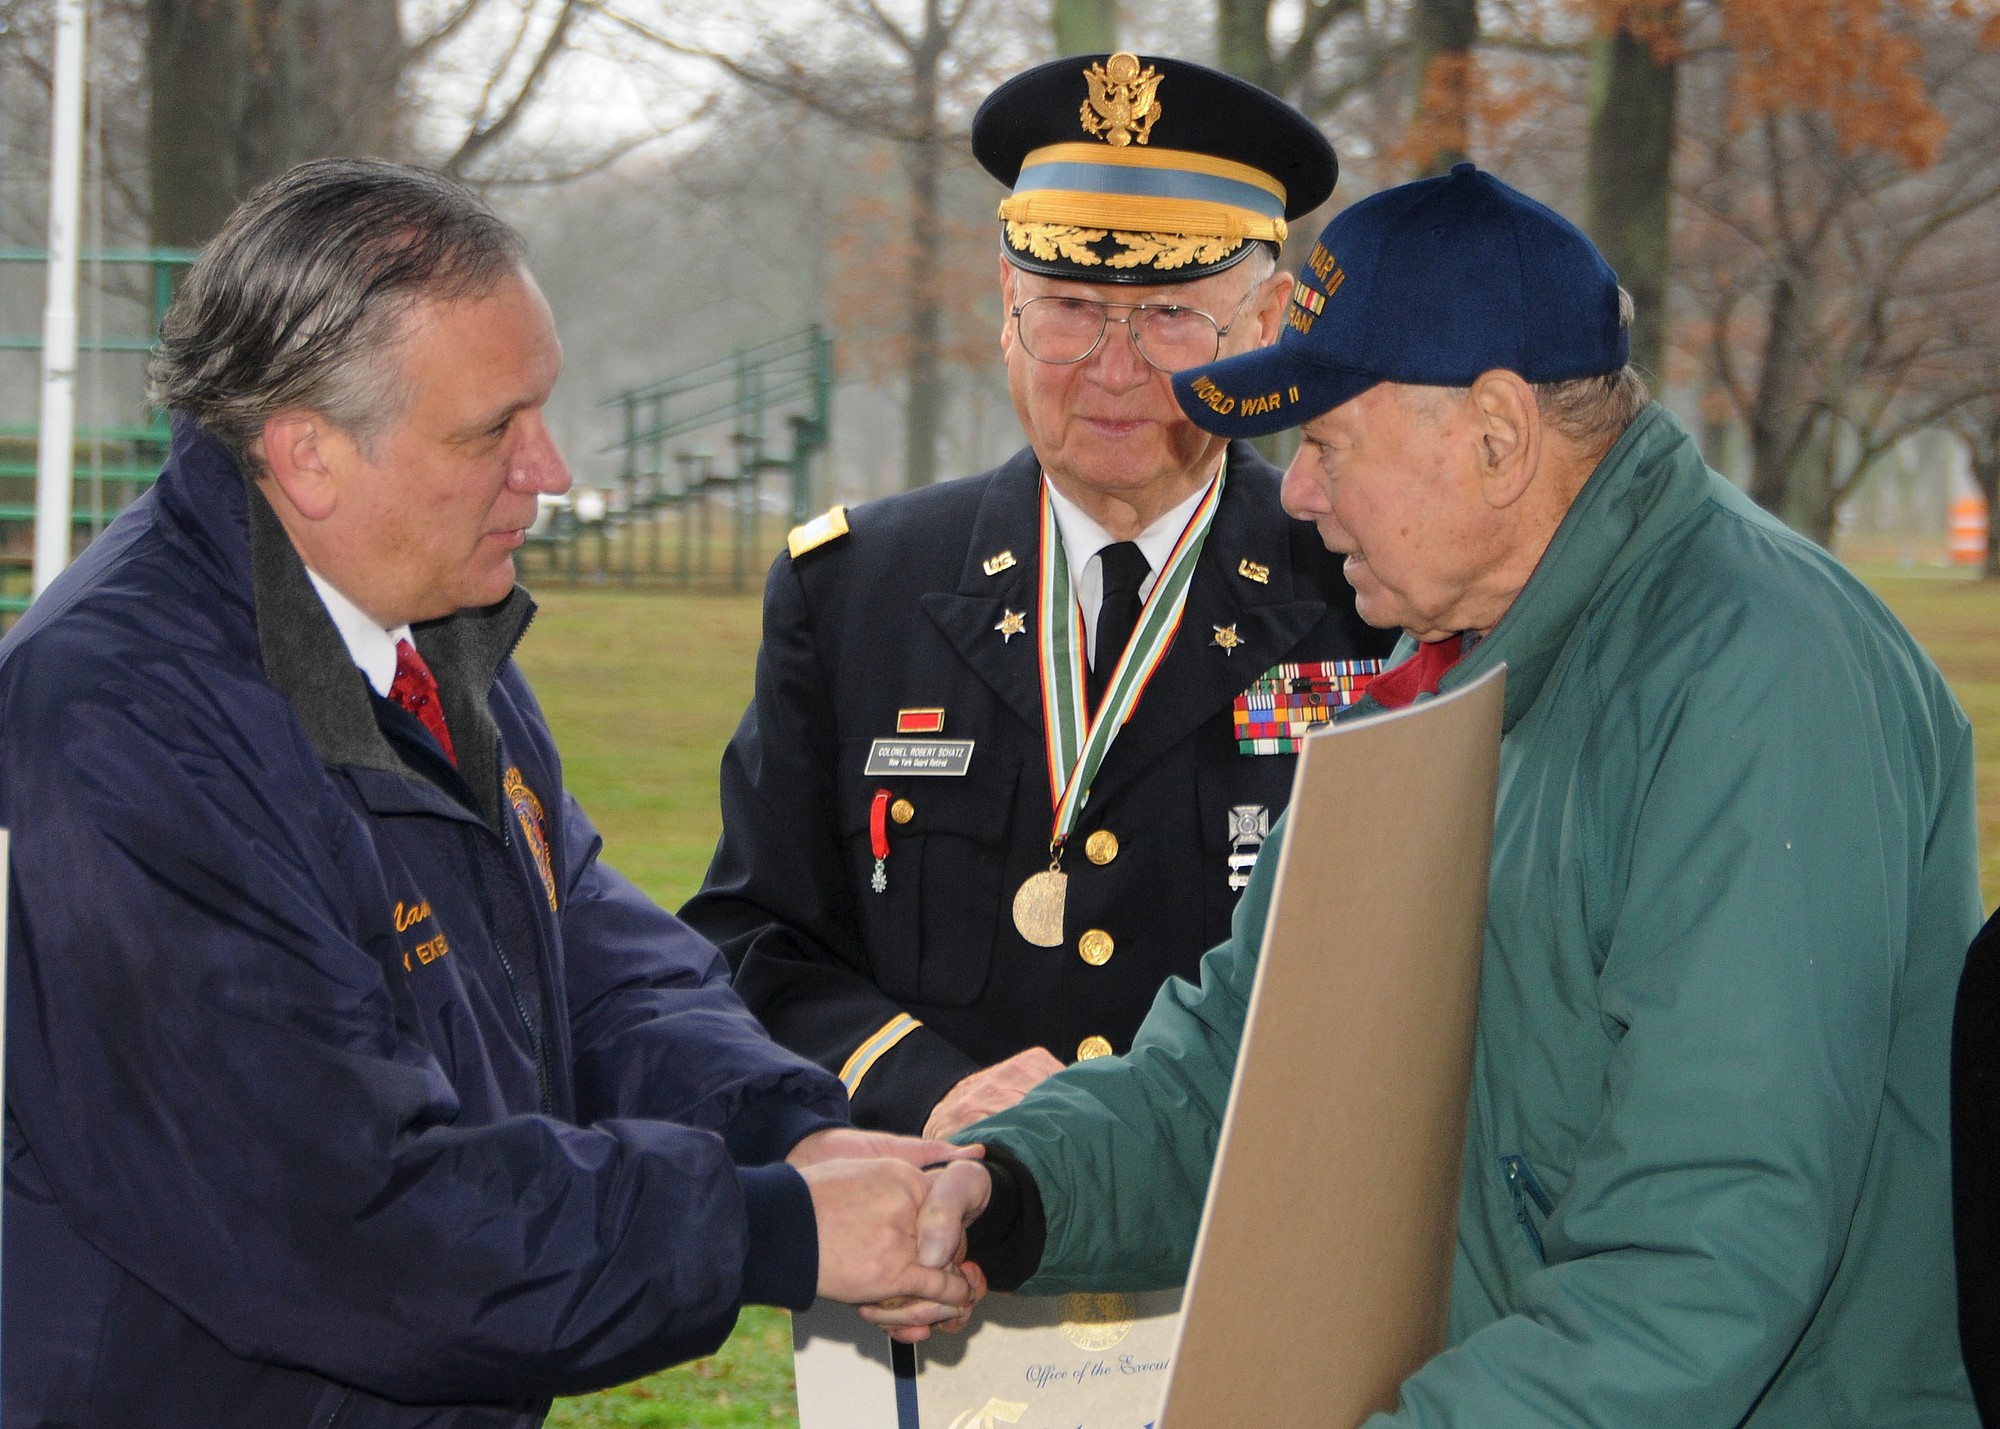 Nassau County Executive Ed Mangano presented Felix Iannacone, a 91-year-old East Meadowite and Battle of the Bulge veteran, with a citation at the ceremony while Robert Scatz looked on.